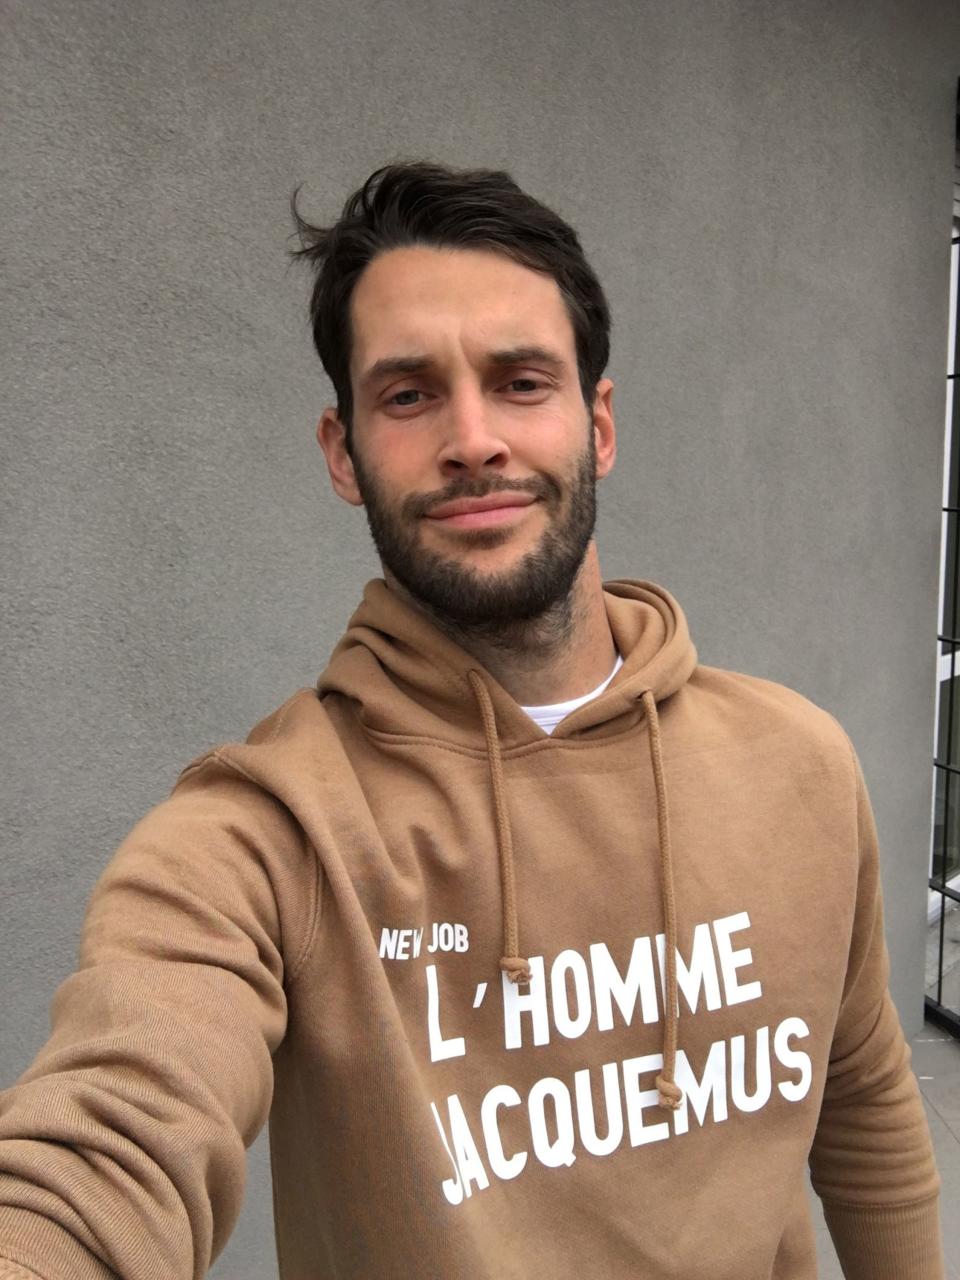 Late last year, Simon Porte Jacquemus told me he was finally ready to show menswear, something he then relentlessly teased via social media without ever actually saying he was doing it.